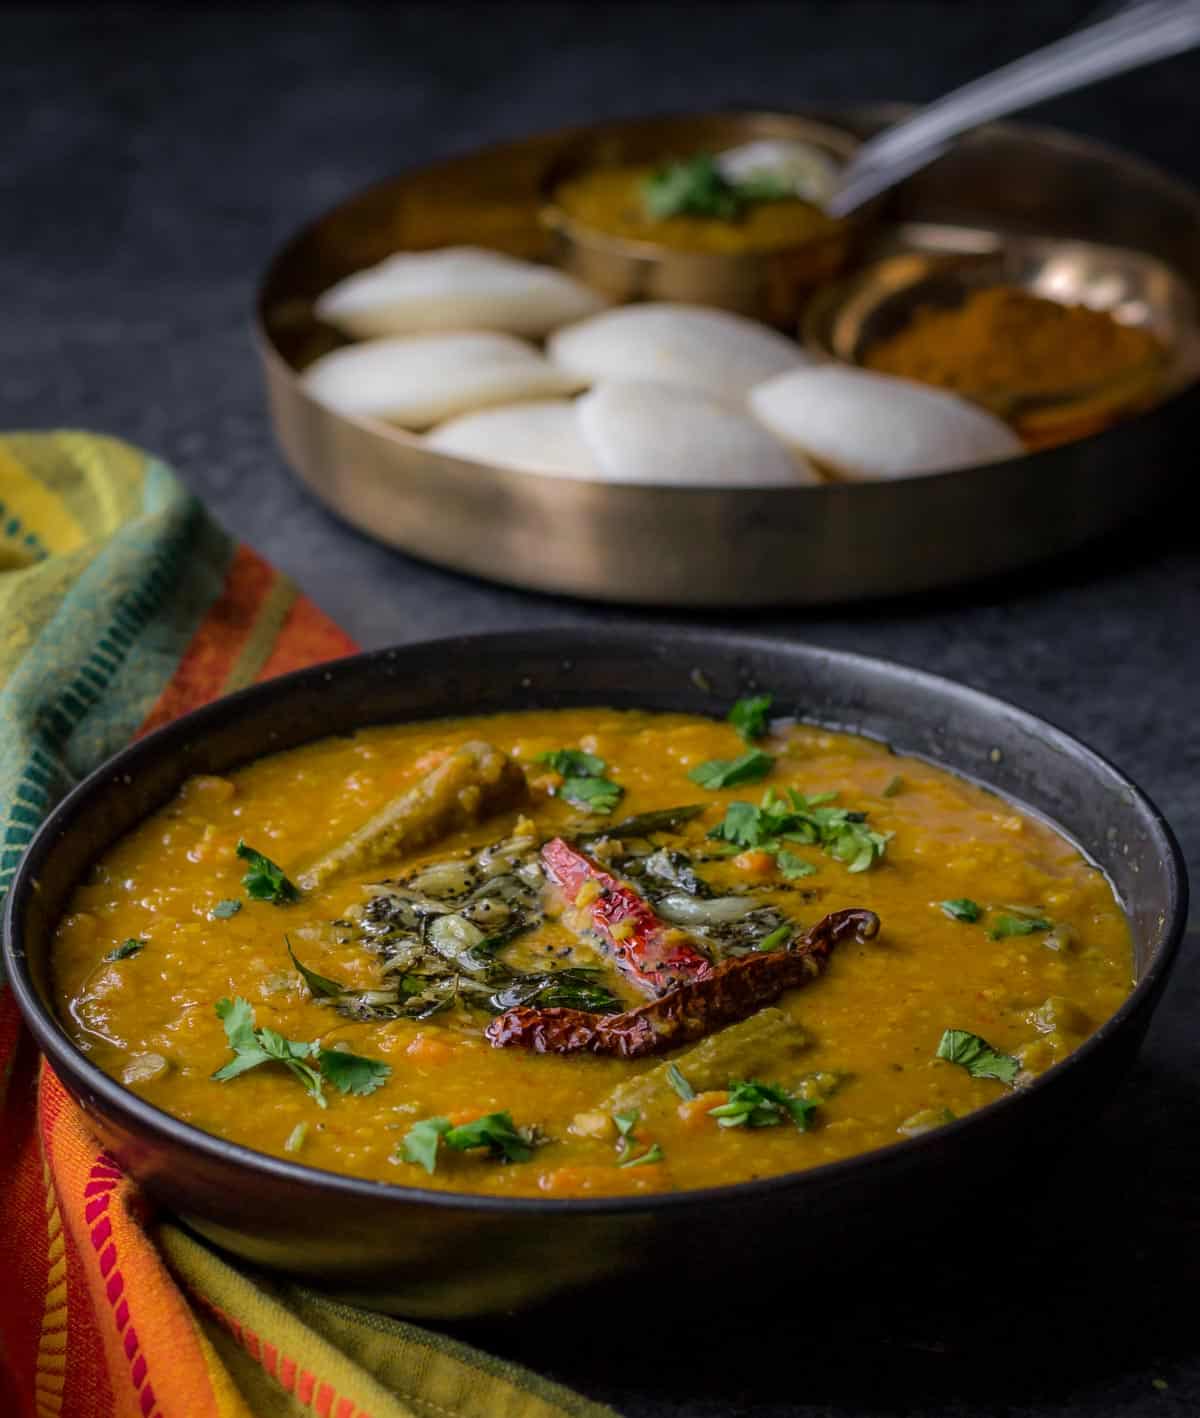 Sambar or Sambhar is a tangy and mildly spicy lentil-vegetable stew from the southern part of India. It is a staple in most South Indian homes and is served alongside idlis or dosas for breakfast or with rice for lunch/dinner.